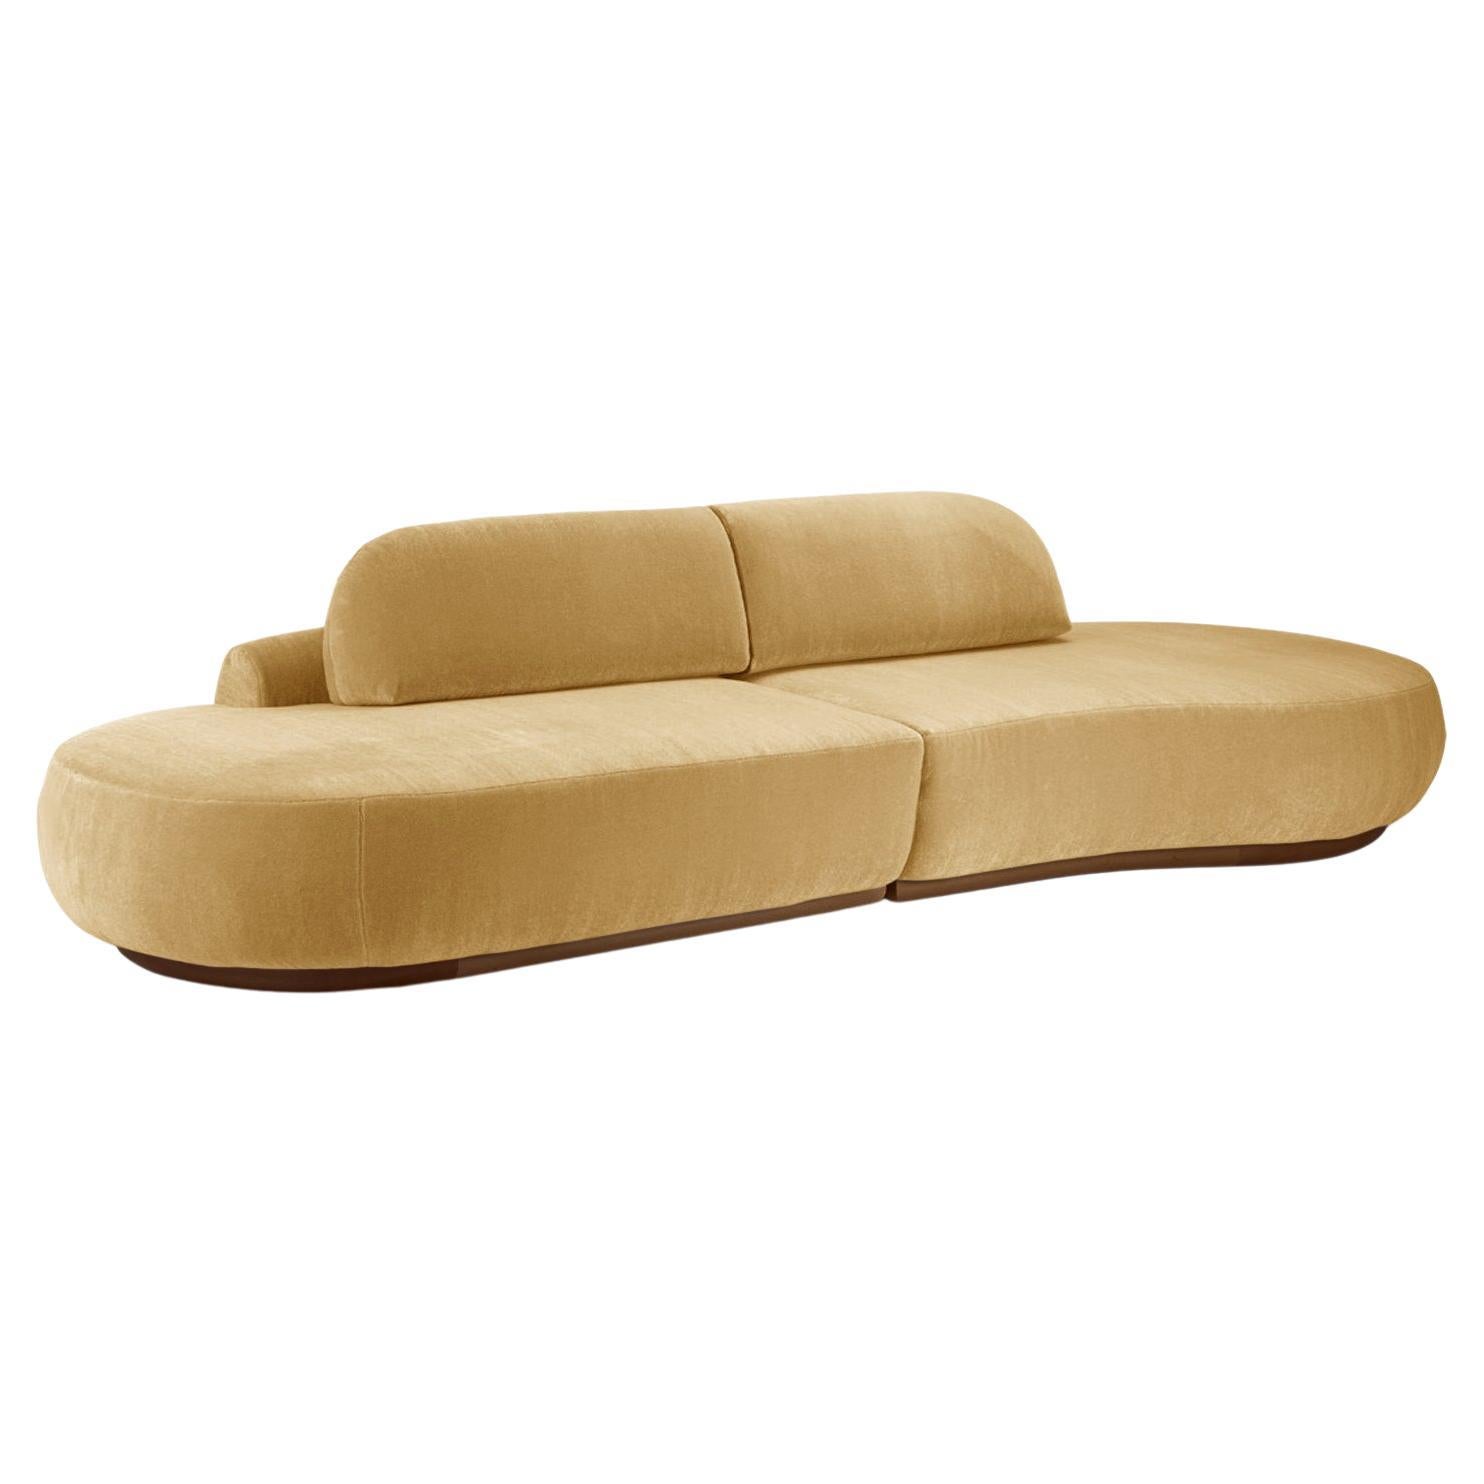 Naked Curved Sectional Sofa, 2 Piece with Beech Ash-056-1 and Vigo Plantain For Sale